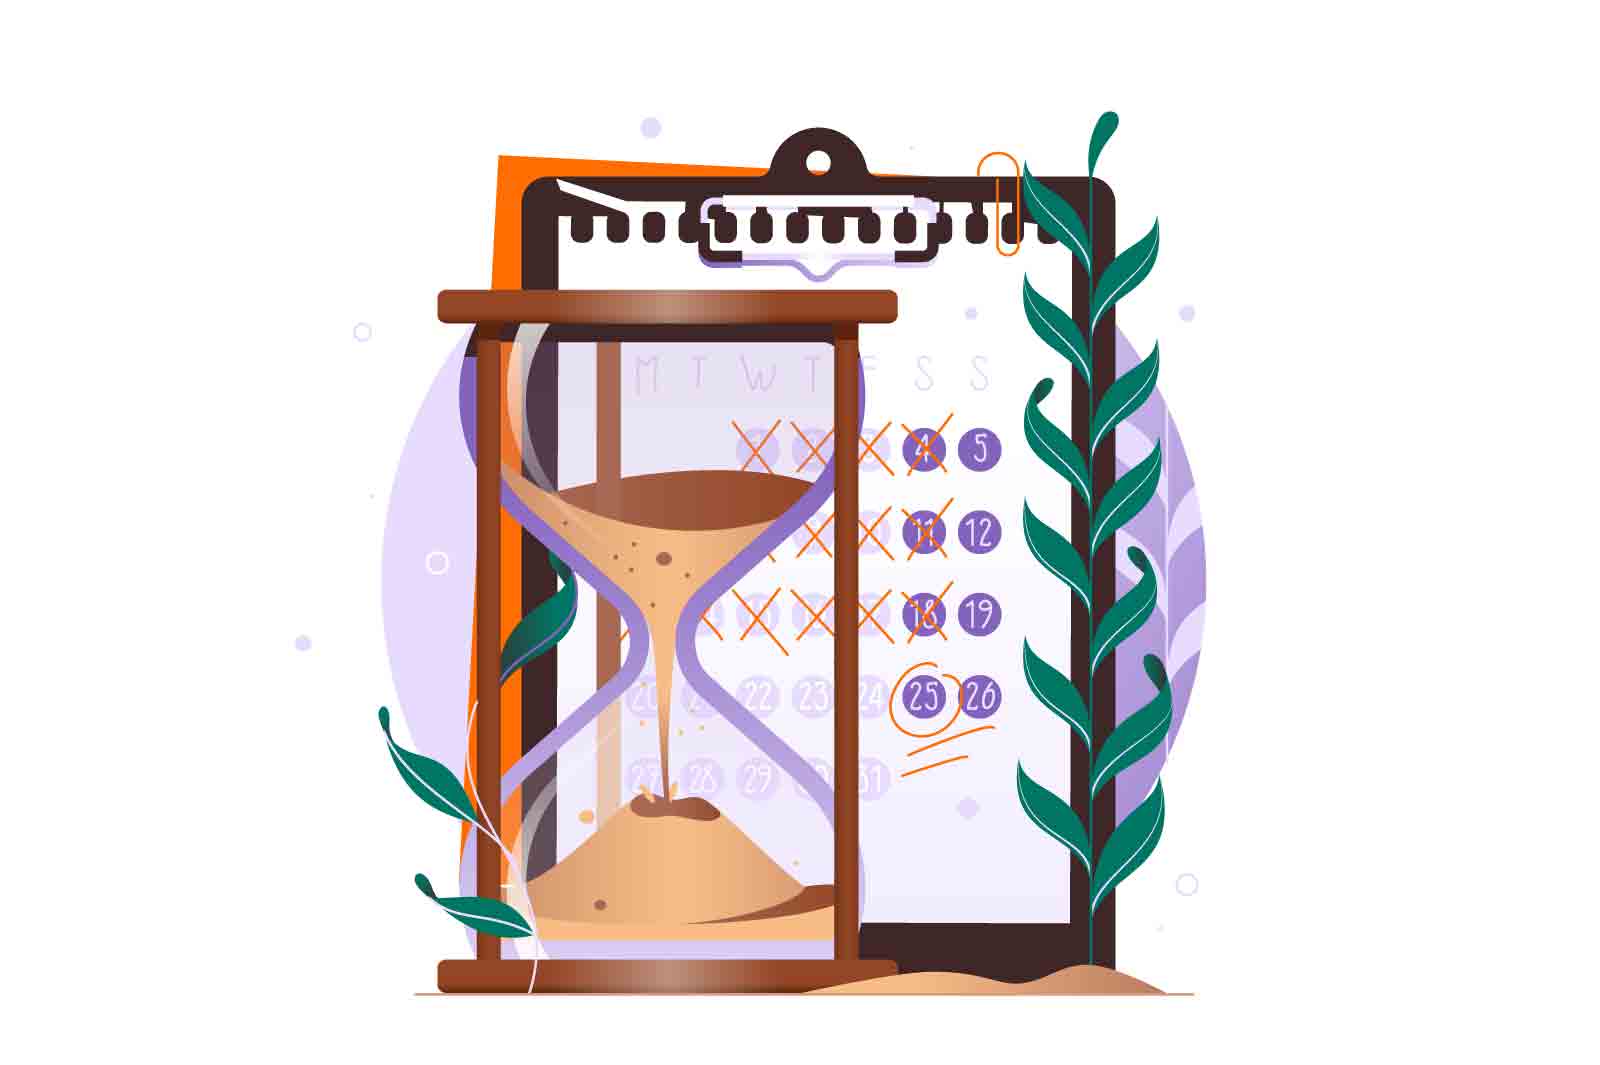 Big hourglass with calendar vector illustration. Effective time control, tracking and monitoring, task management or work planning and productivity flat style concept